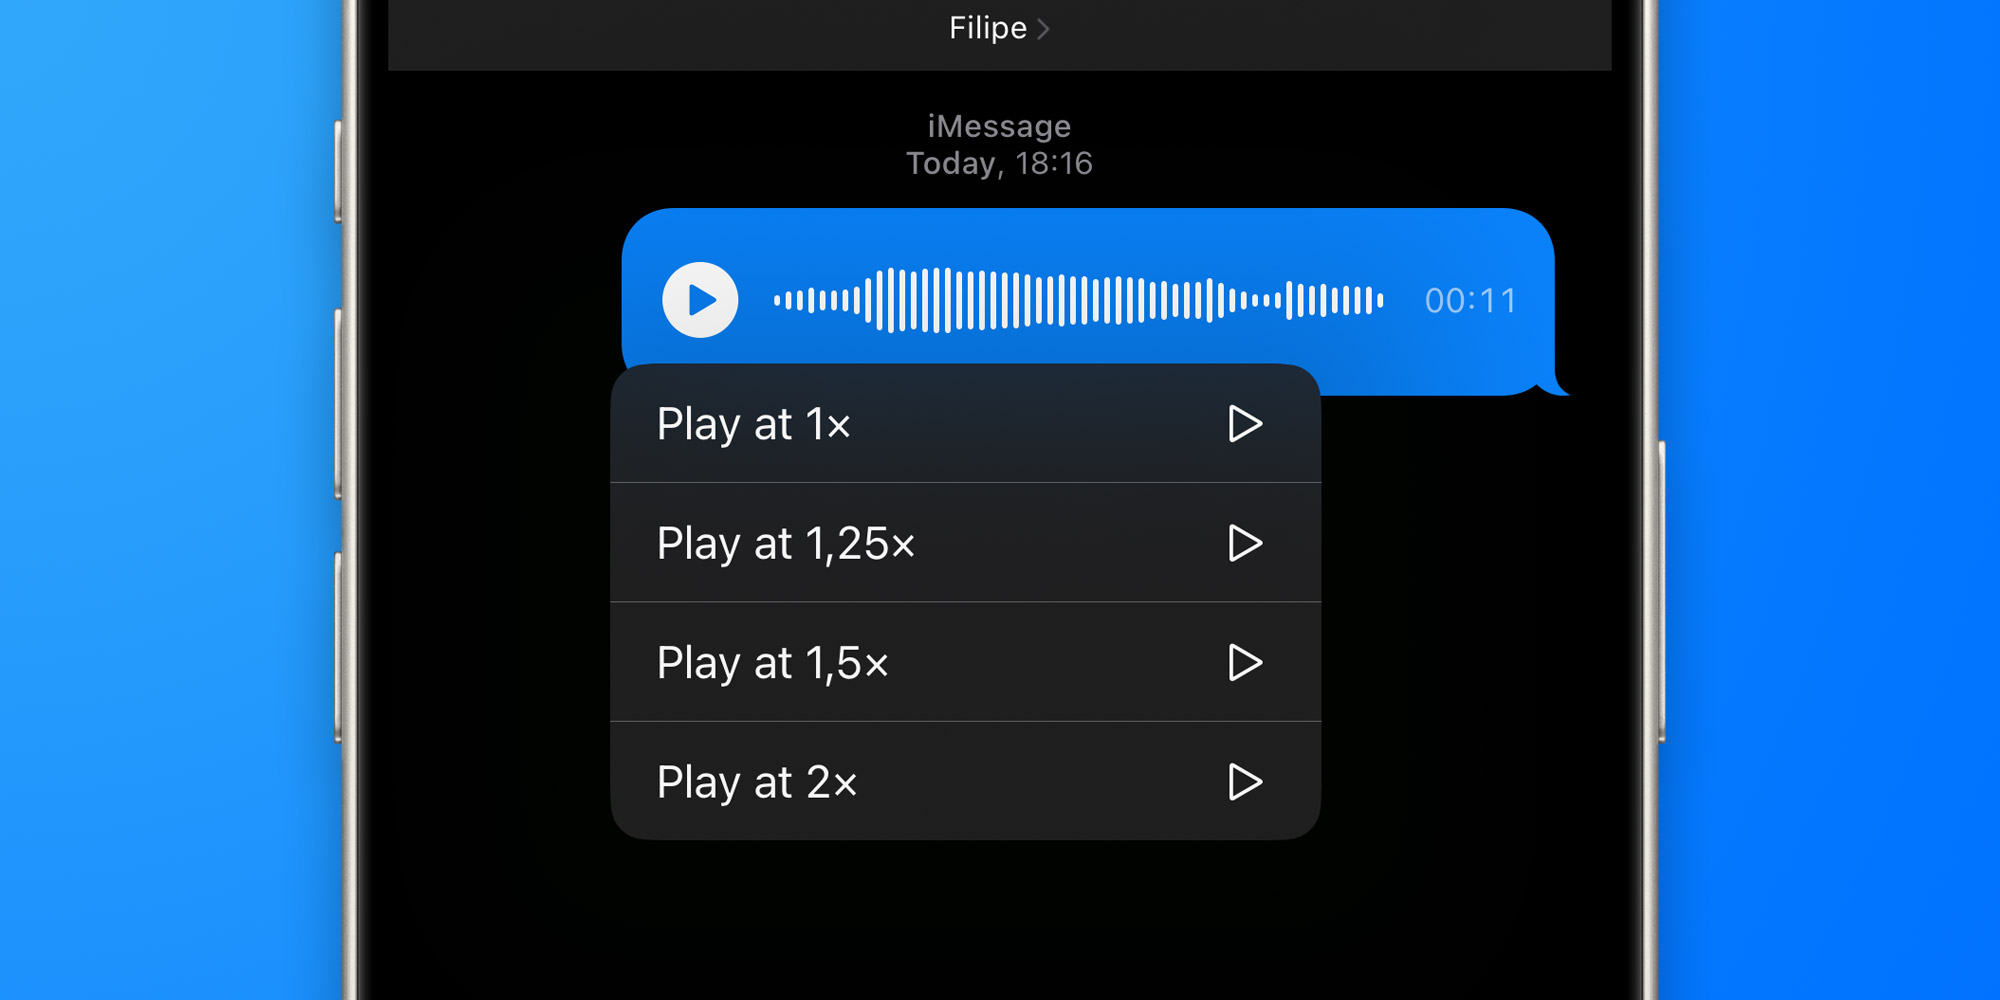 Here's how to adjust the playback speed in iMessage